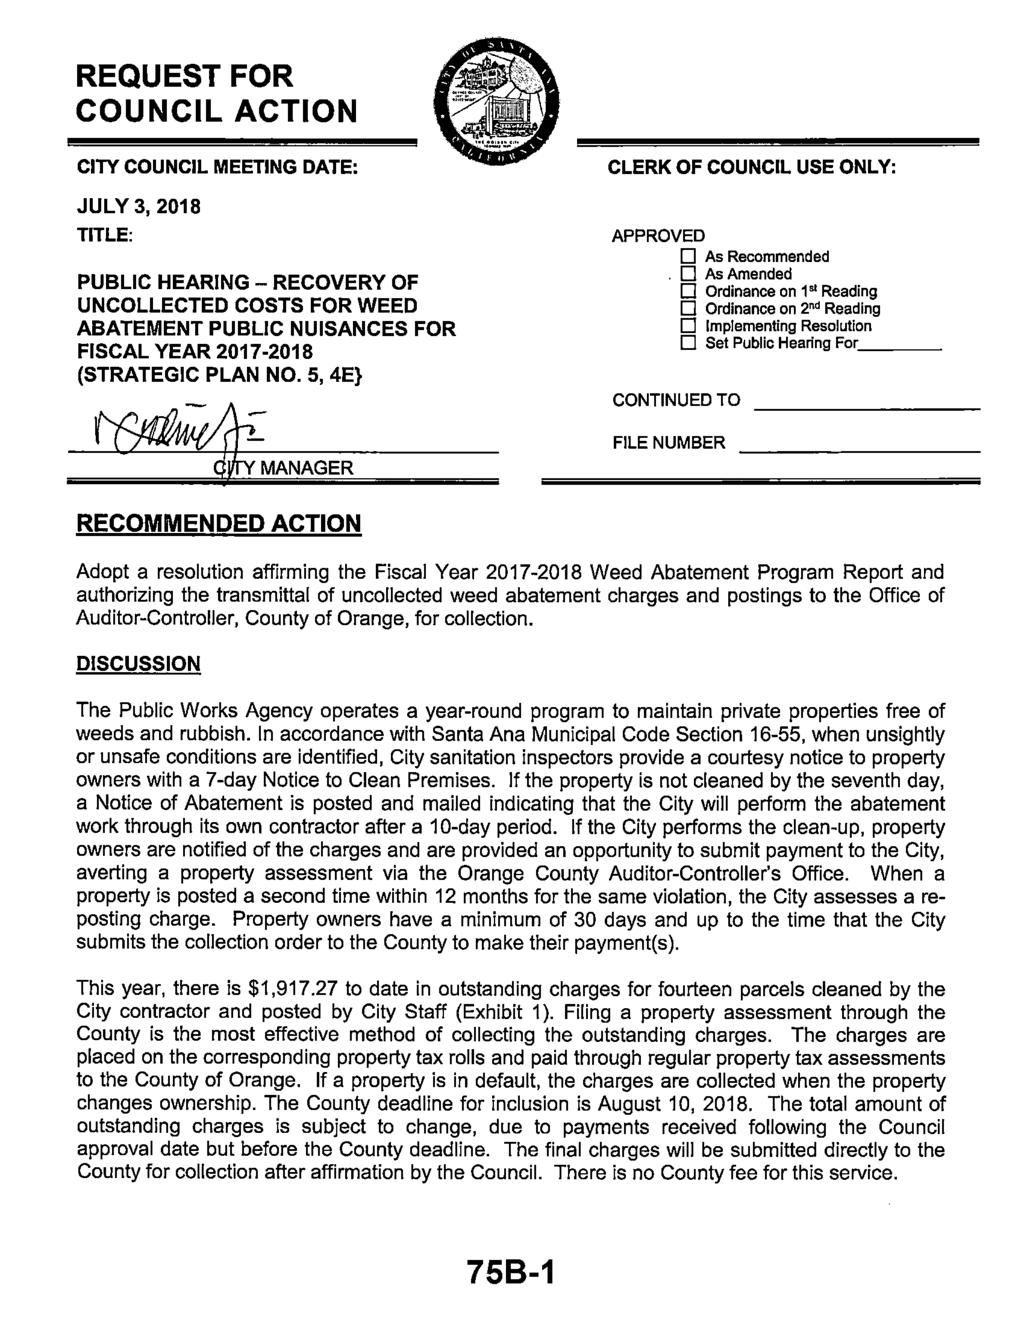 REQUEST FOR COUNCIL ACTION CITY COUNCIL MEETING DATE: CLERK OF COUNCIL USE ONLY: JULY 3, 2018 TITLE: PUBLIC HEARING RECOVERY OF UNCOLLECTED COSTS FOR WEED ABATEMENT PUBLIC NUISANCES FOR FISCAL YEAR